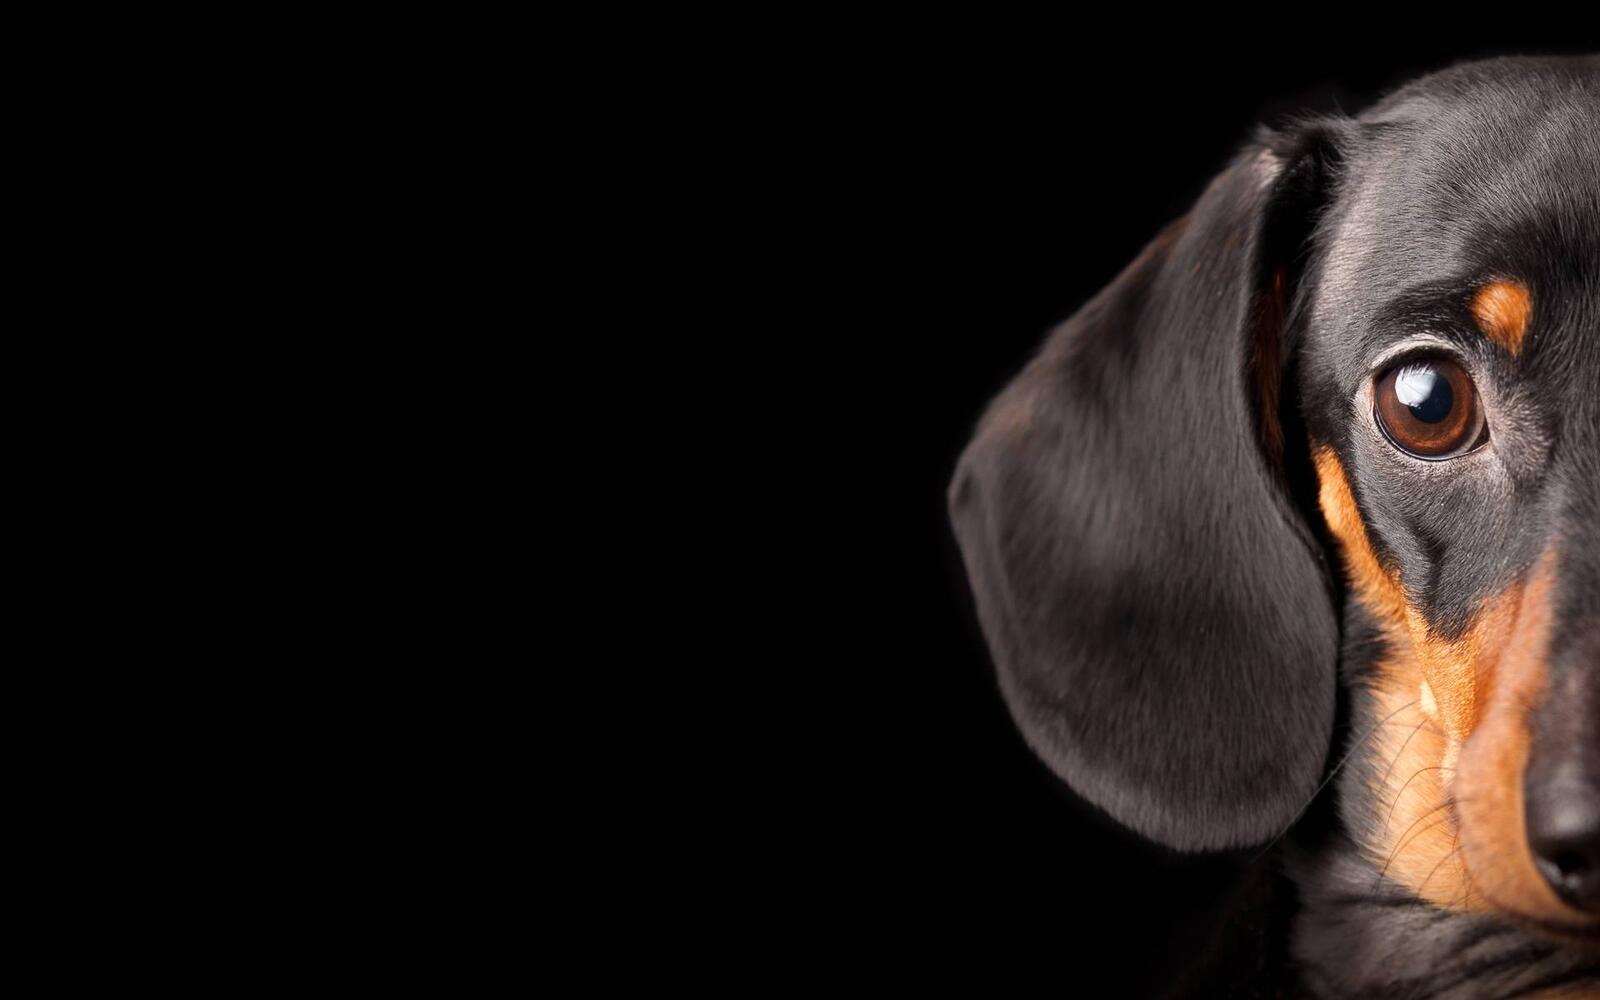 Wallpapers dachshund muzzle eyes on the desktop